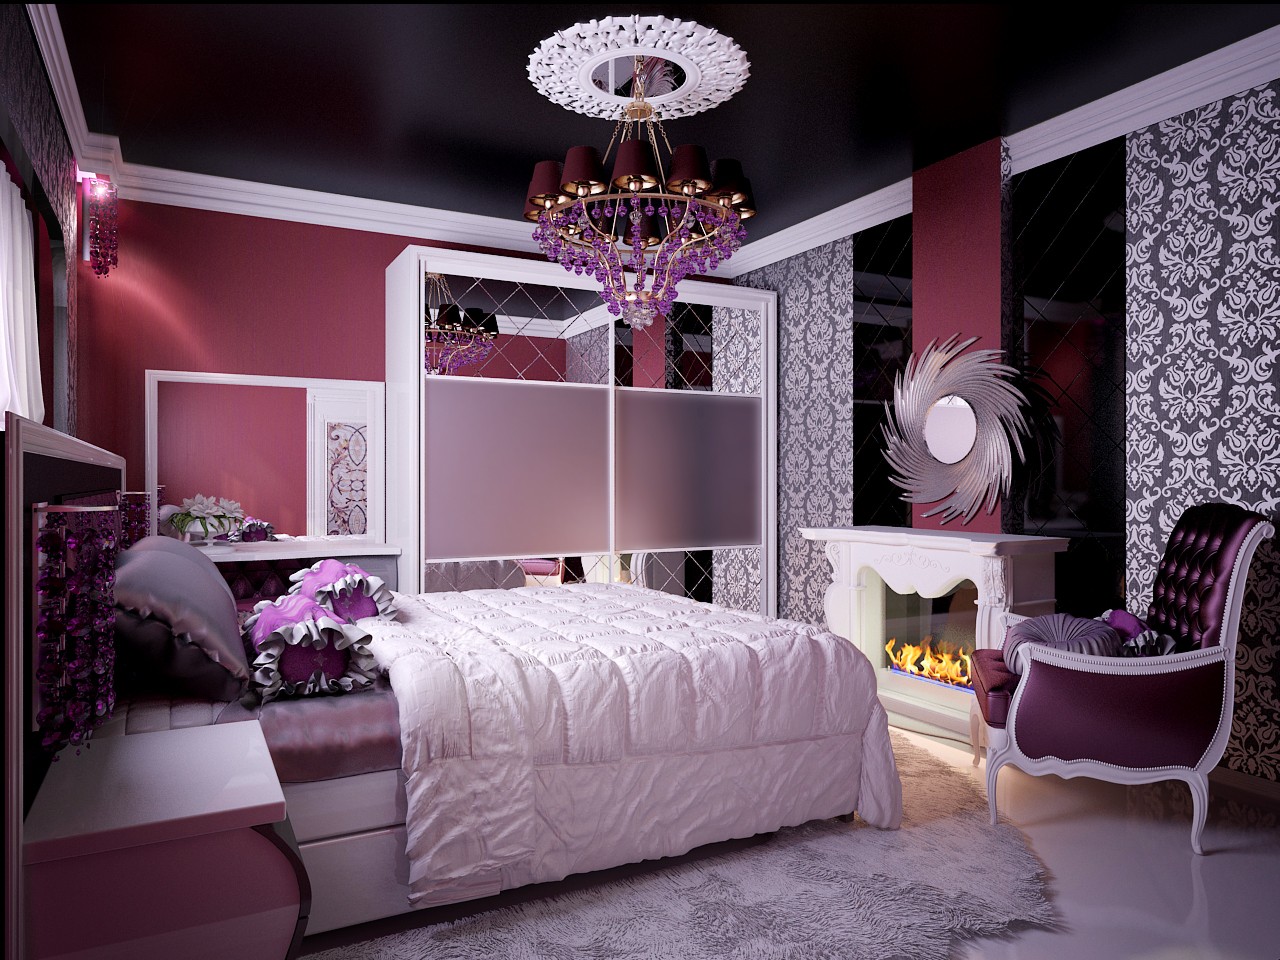 Black And White Woman Bedroom Decor